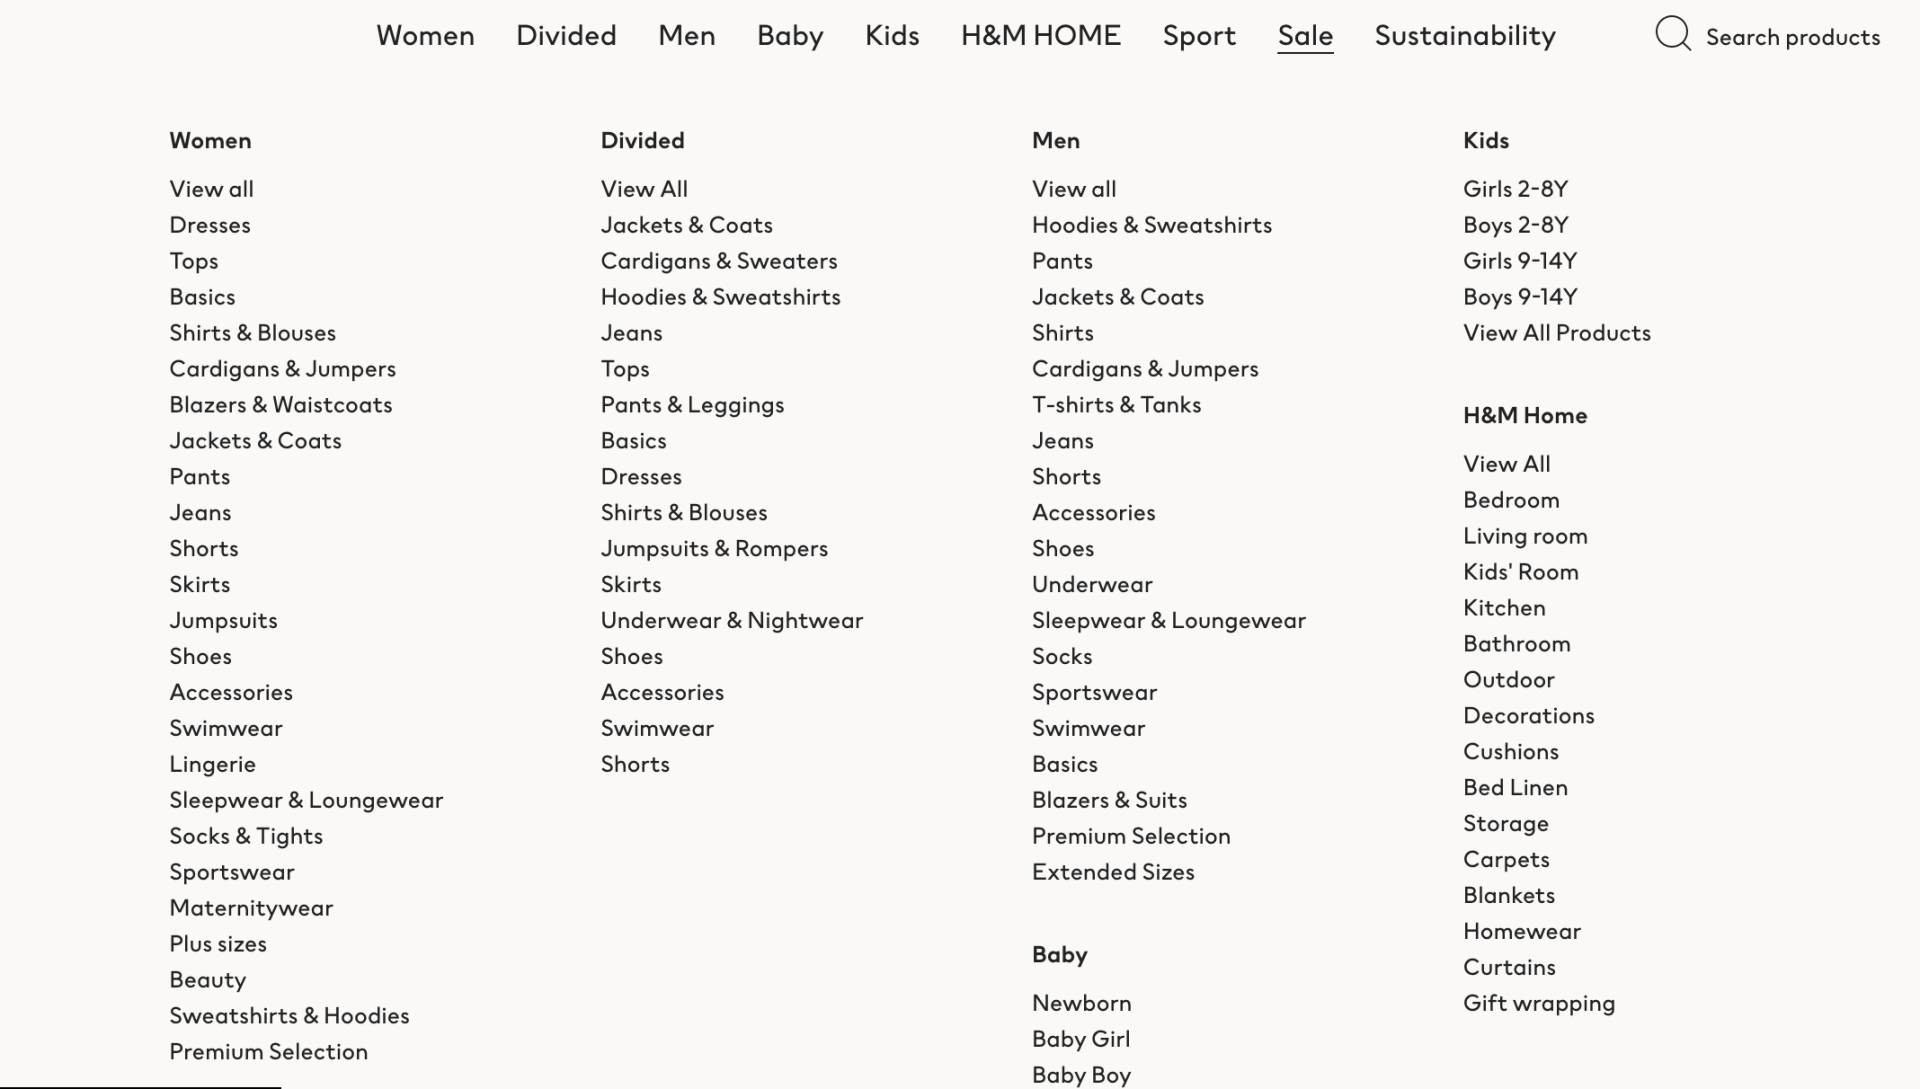 A screenshot of H&M categories on their website - the sale category